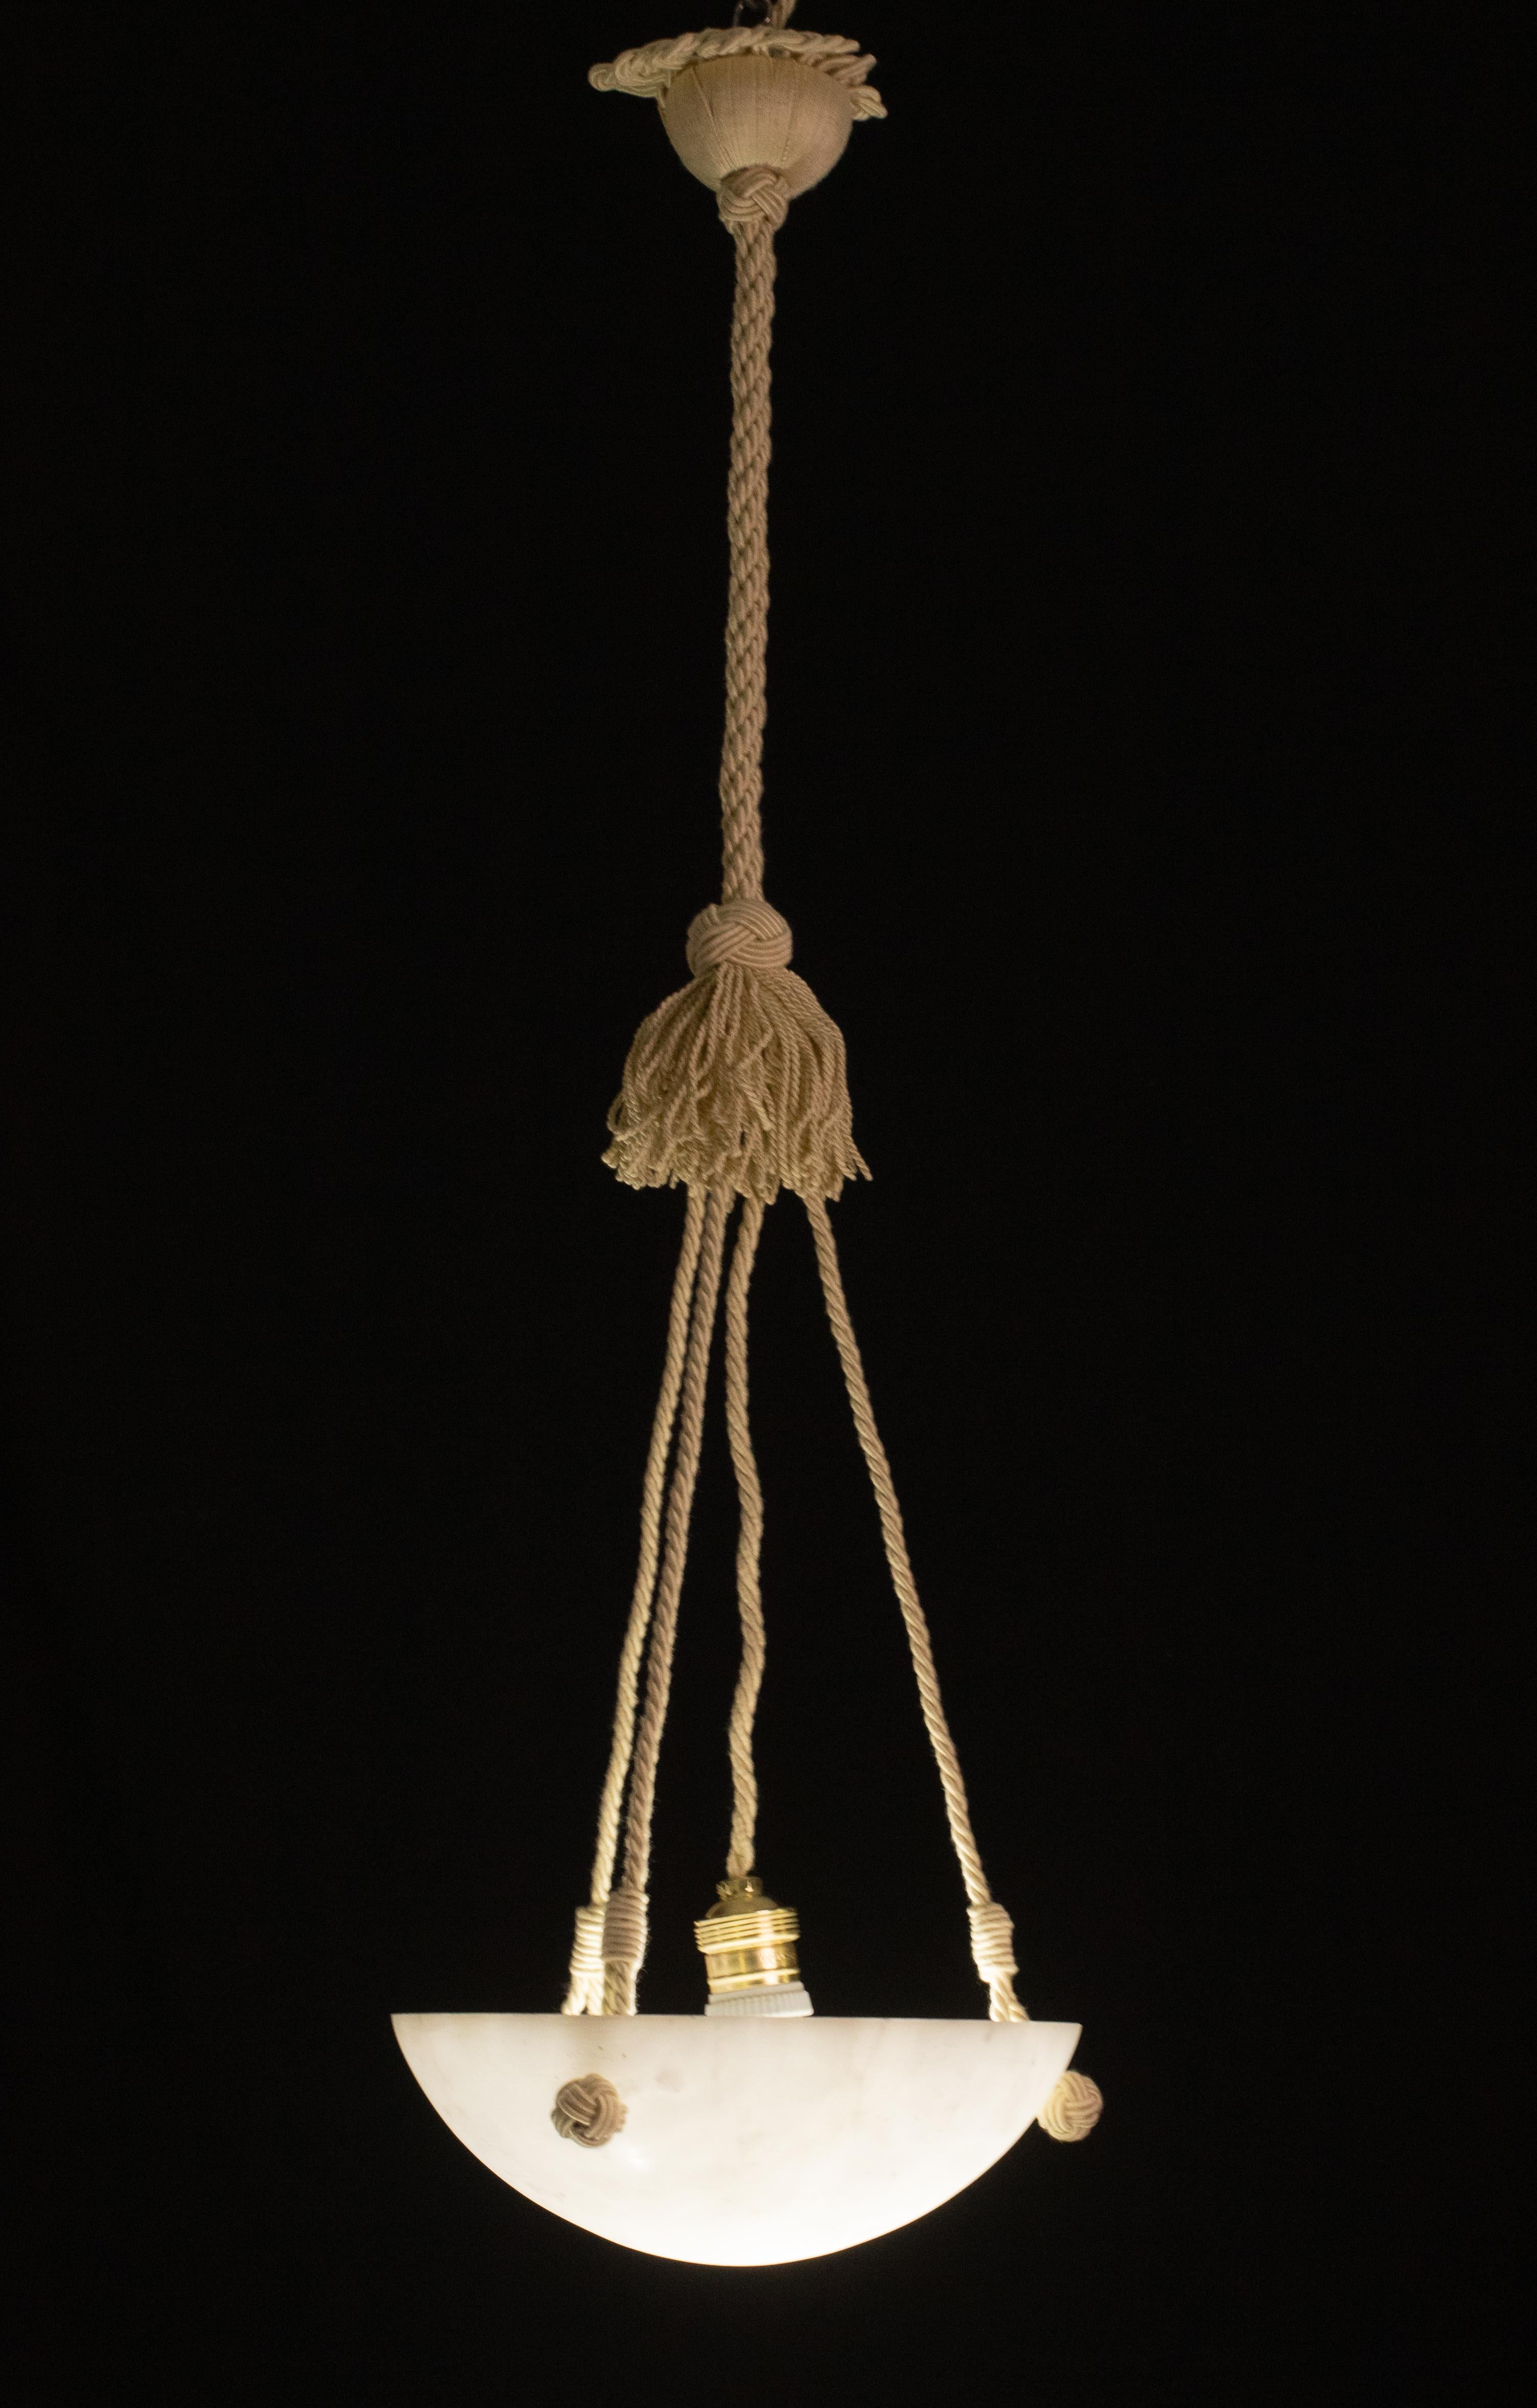 Antique alabaster hanging lamp in Art Deco style, circa 1950s. 
A single piece of alabaster, beautifully worked with hues and reflections of other colours when lit, suspended from three fabric ropes.
The stone is original vintage, perfect vintage